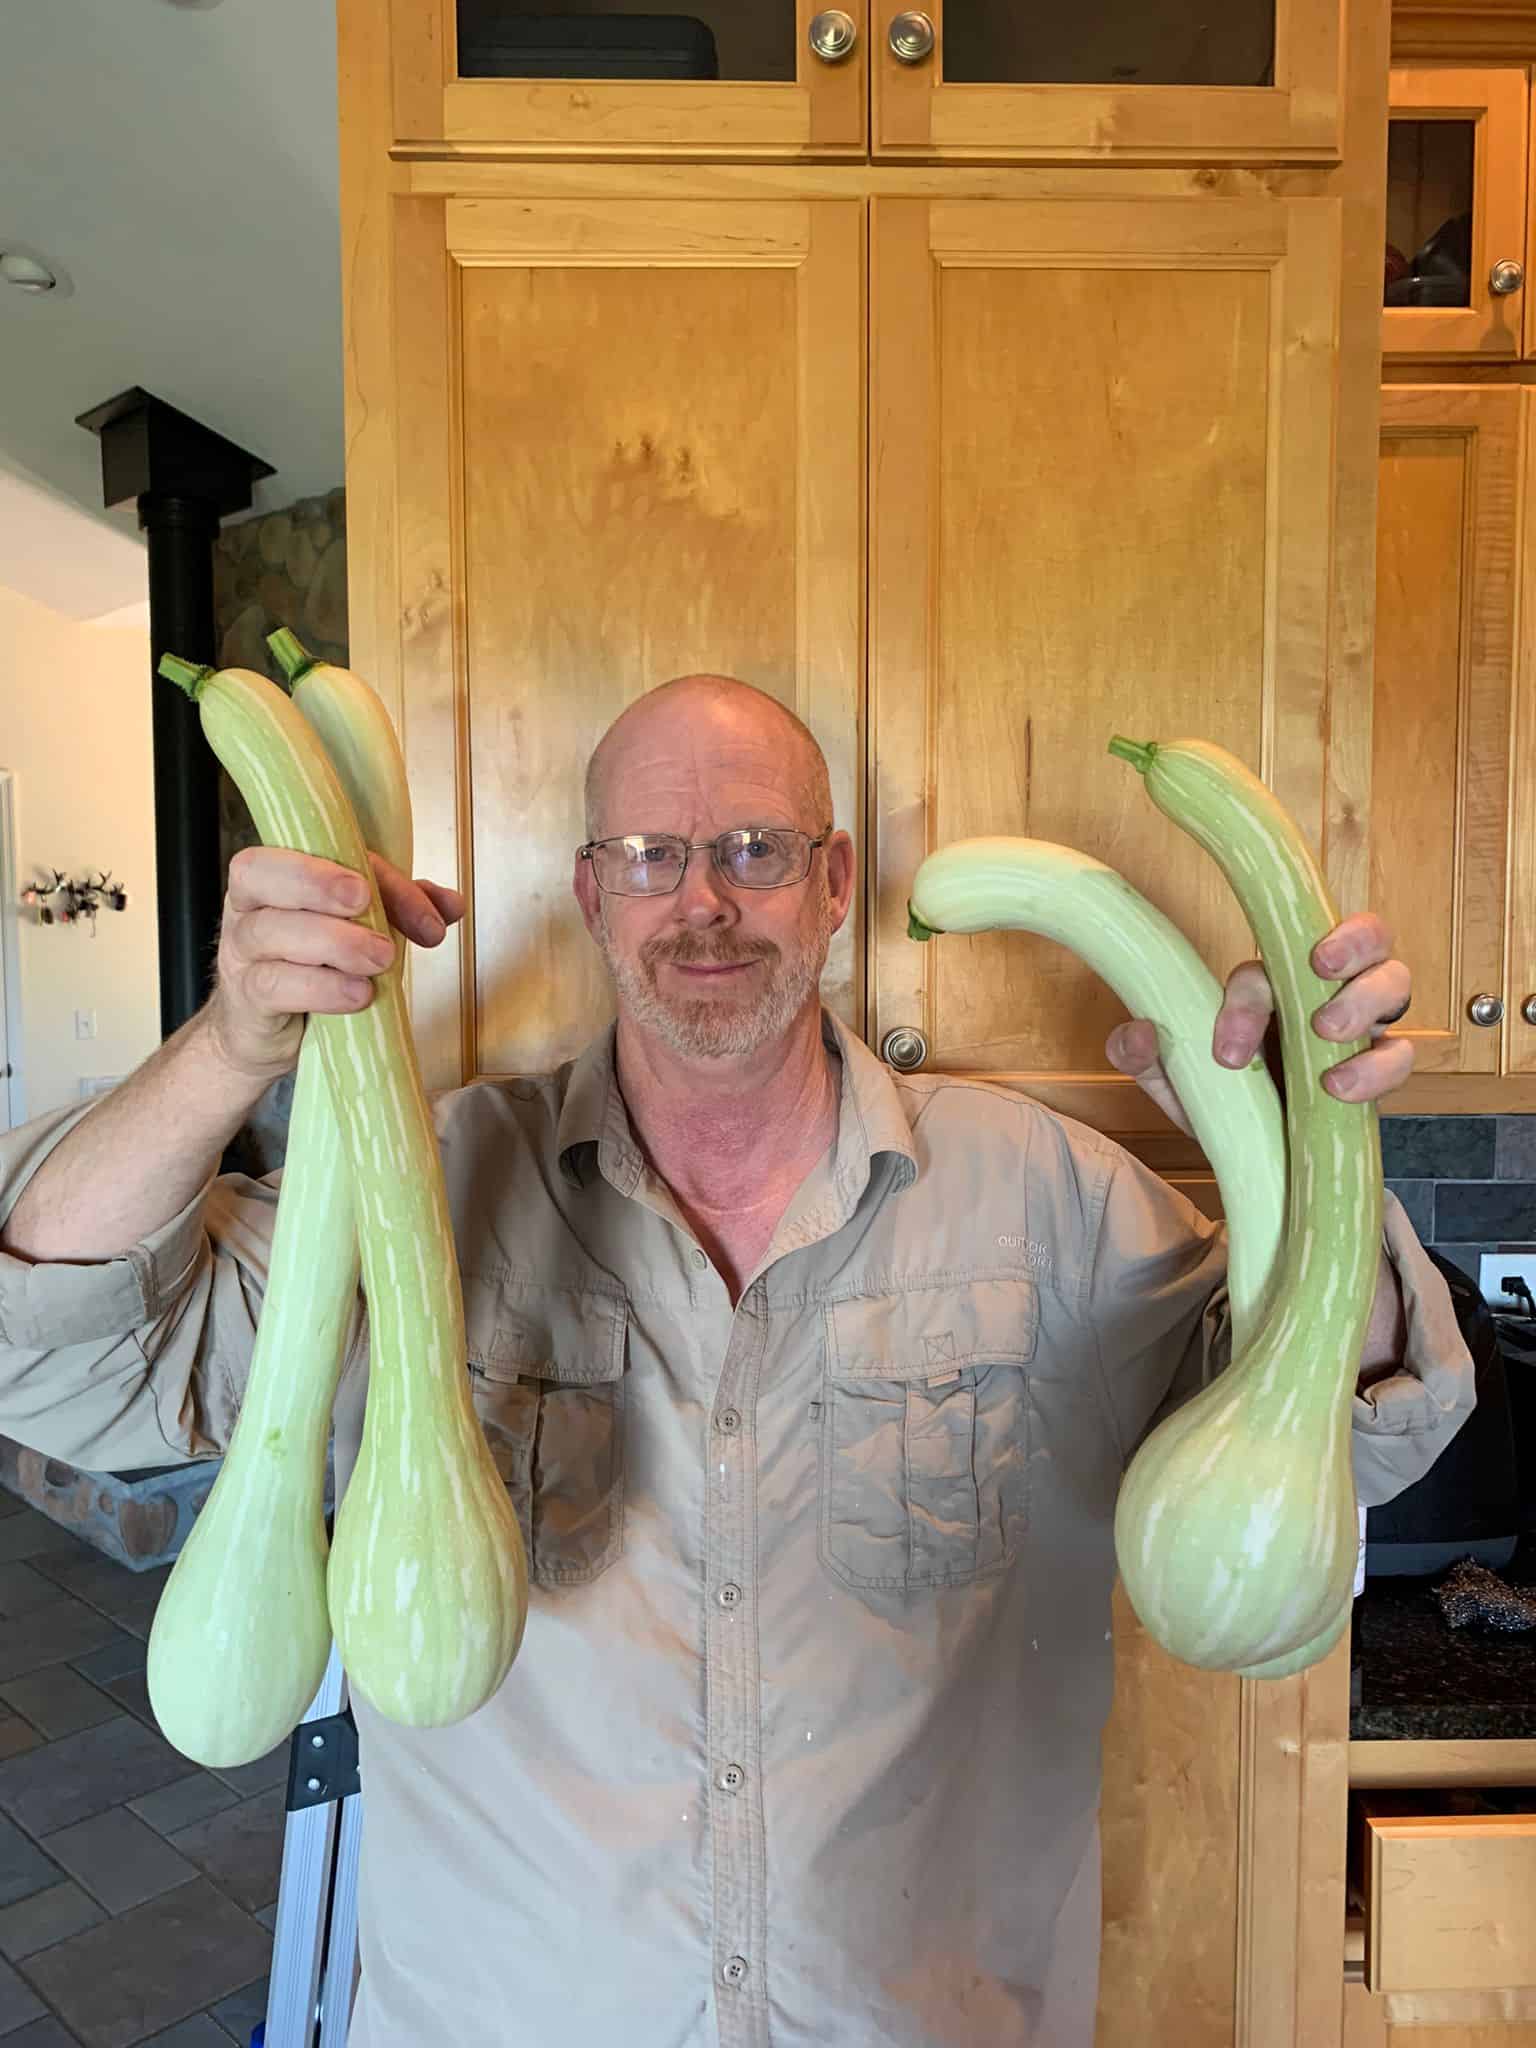 Can You Name This HUGE Squash?